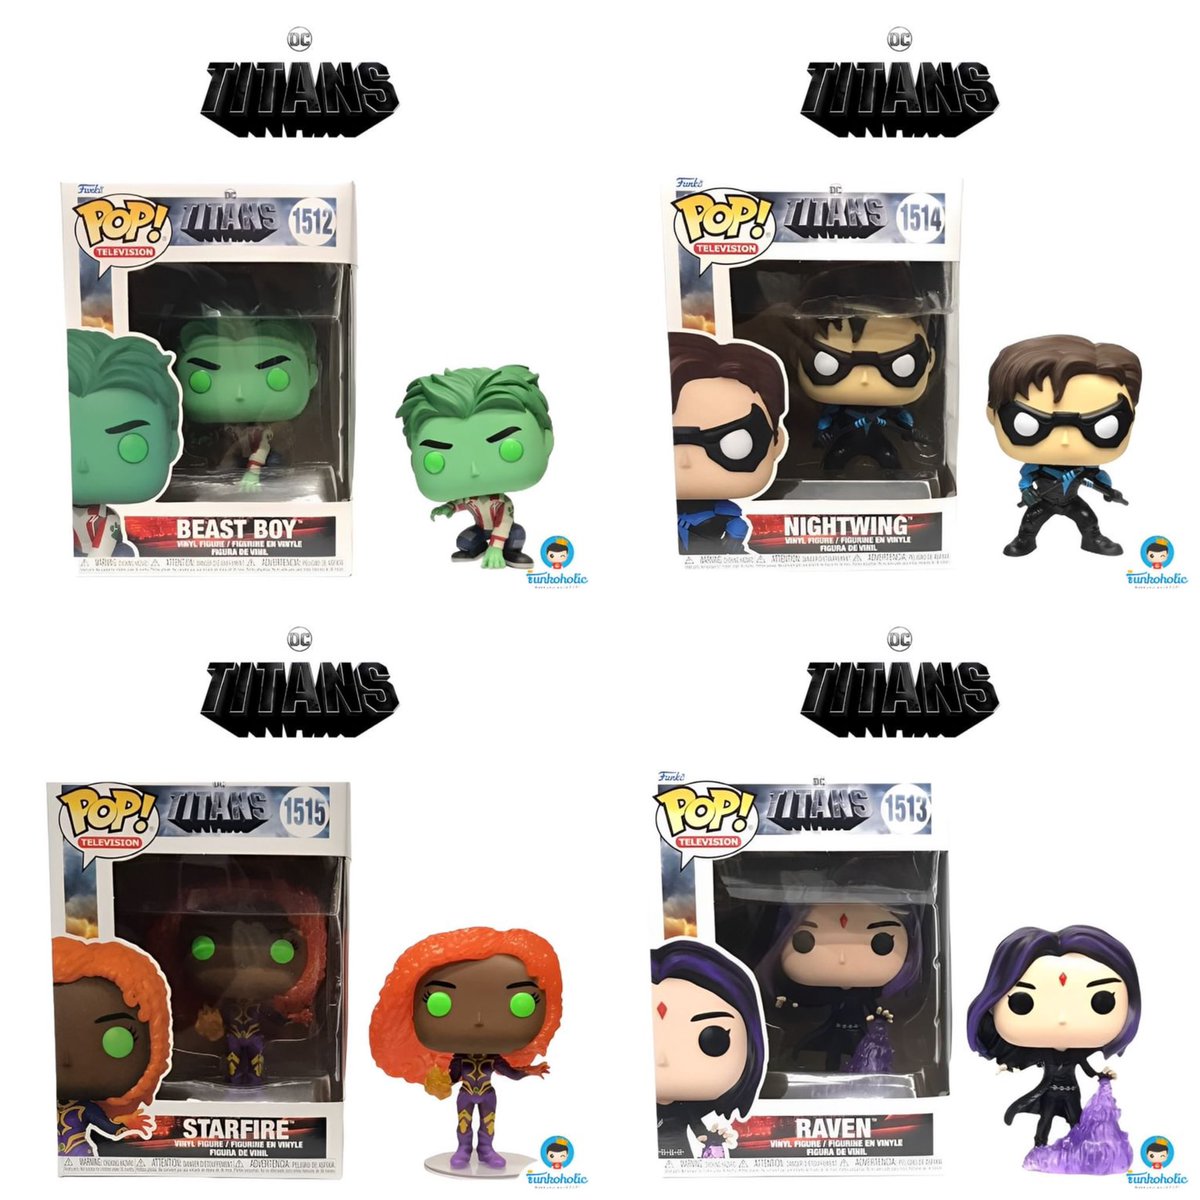 First look at DC Titans Pops! Credit: @funkoholic.id 

#dctitans